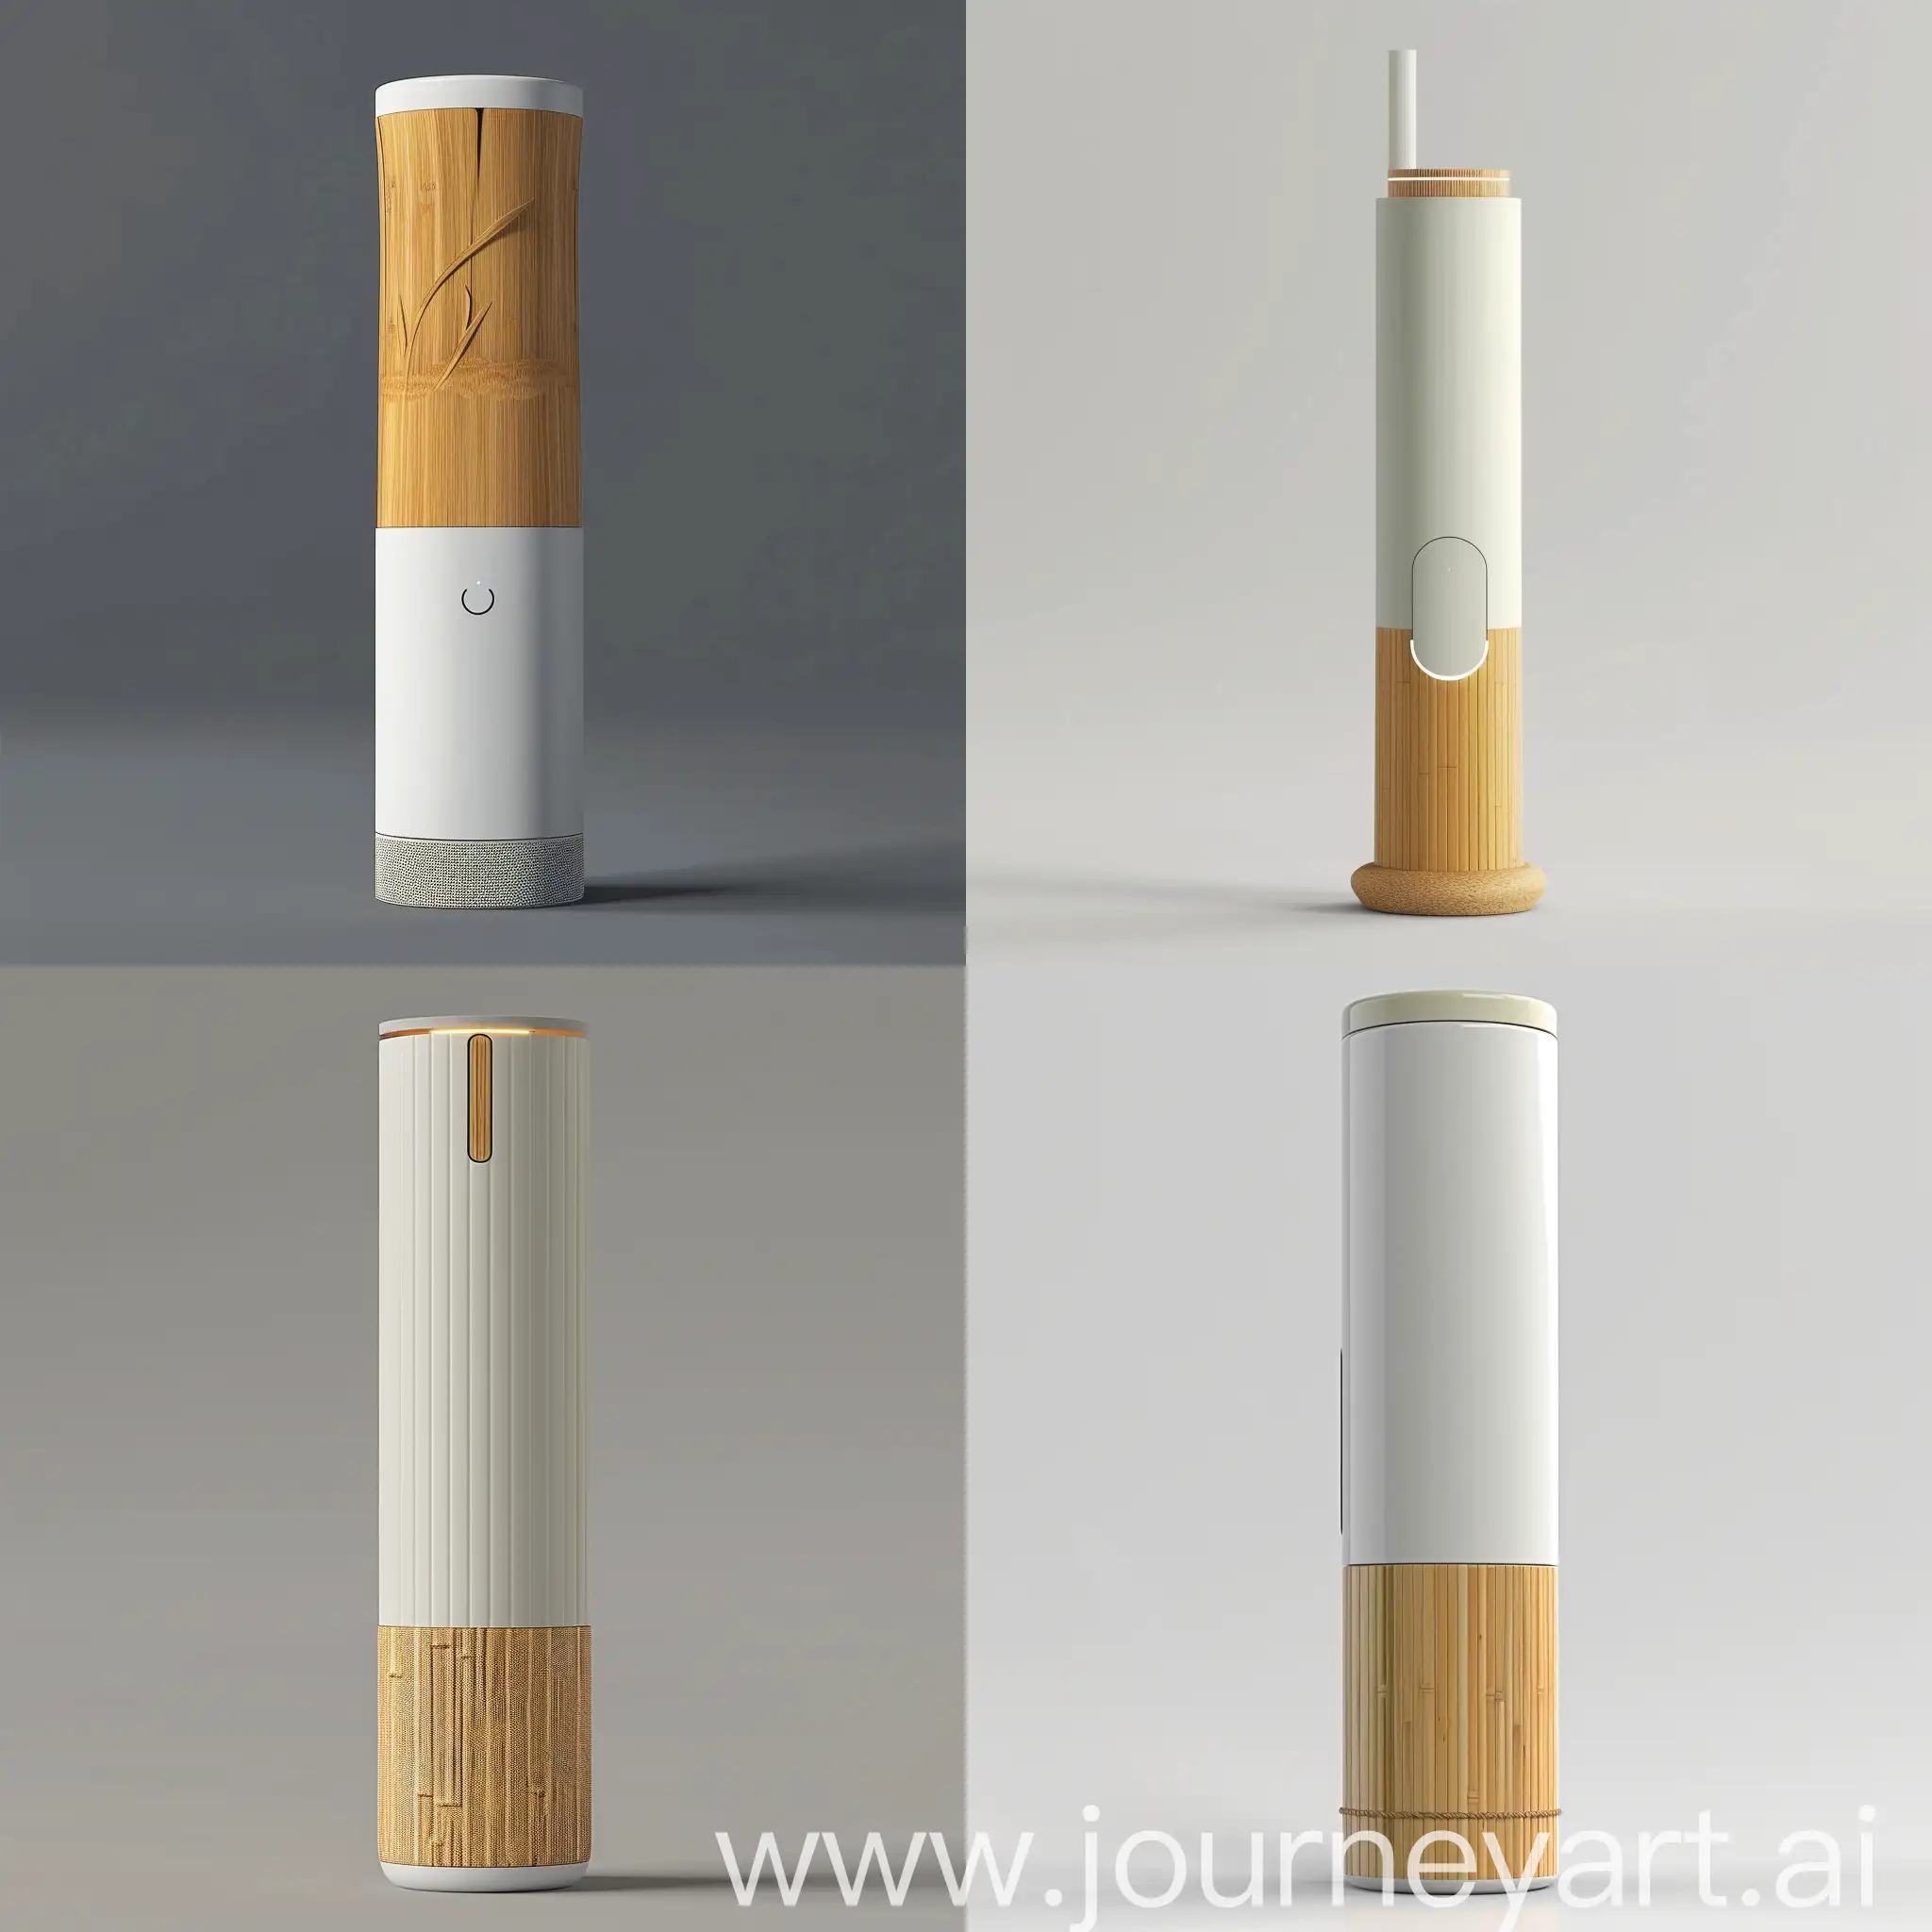 "Visualize a smart energy management device inspired by the serene beauty of Zen gardens and the natural elegance of bamboo. The device stands 25 cm tall, tapering from an 8 cm sustainable bamboo base to a 5 cm top, embodying the strength and flexibility of bamboo. Its body, made from high-quality recycled plastics, adopts neutral tones of white or light gray, with a textured surface mimicking bamboo's natural feel. Atop, an innovative LED light tag simulates the dappled sunlight through bamboo leaves, serving both as an ambient light source and notification indicator. A discreet touch-sensitive strip allows for intuitive user interaction, blending seamlessly into the device's form. The base hides a USB-C charging port, maintaining the sleek, cord-free aesthetic. This concept merges technology with traditional Zen aesthetics, creating a piece that not only enhances smart home functionality but also promotes sustainability and mindfulness."realistic style